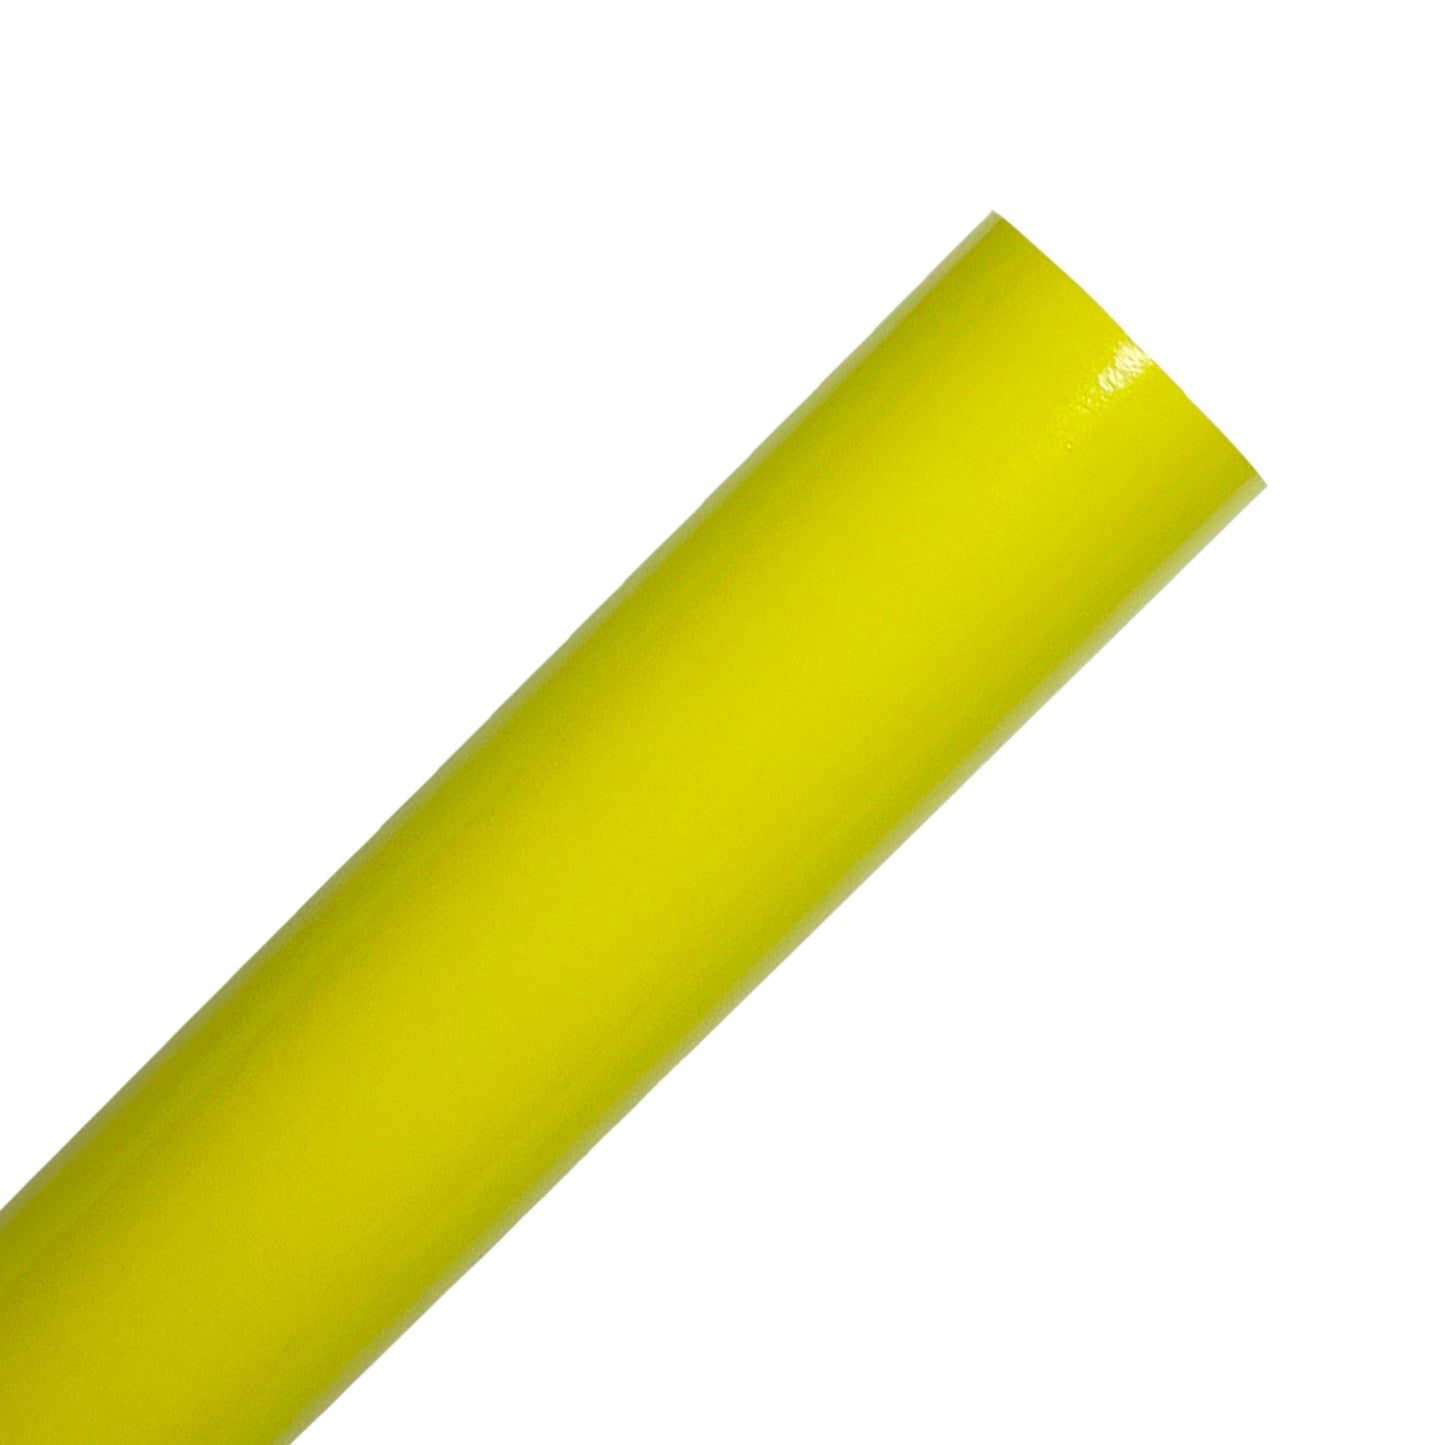 Bright Yellow Adhesive Vinyl Rolls By Craftables